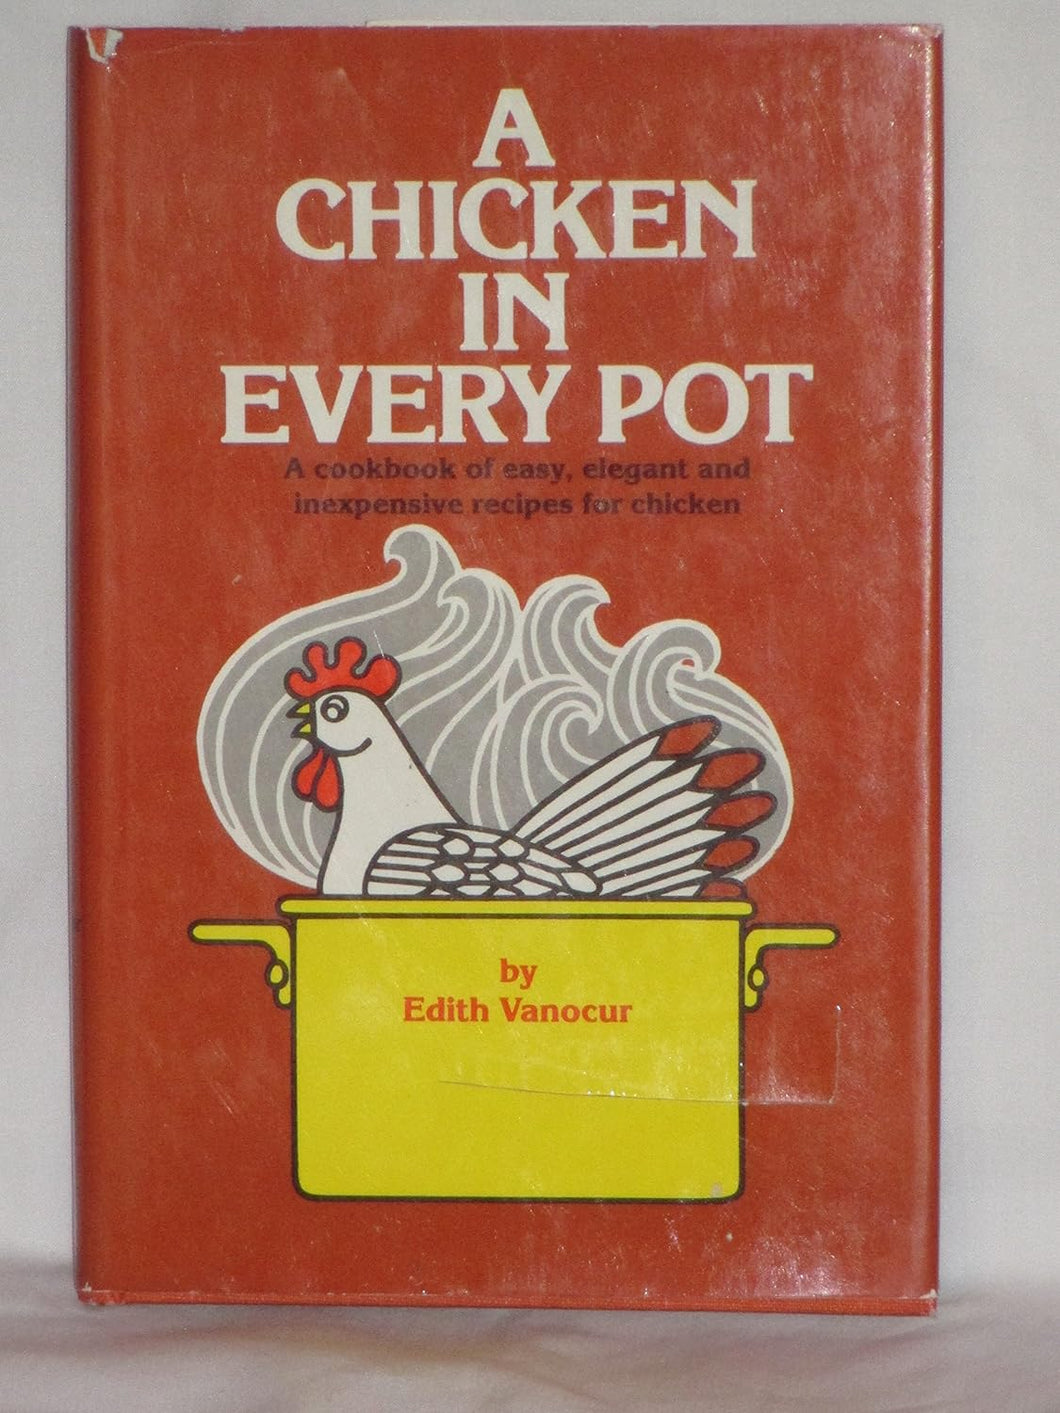 A Chicken In Every Pot by Edith Vanocur